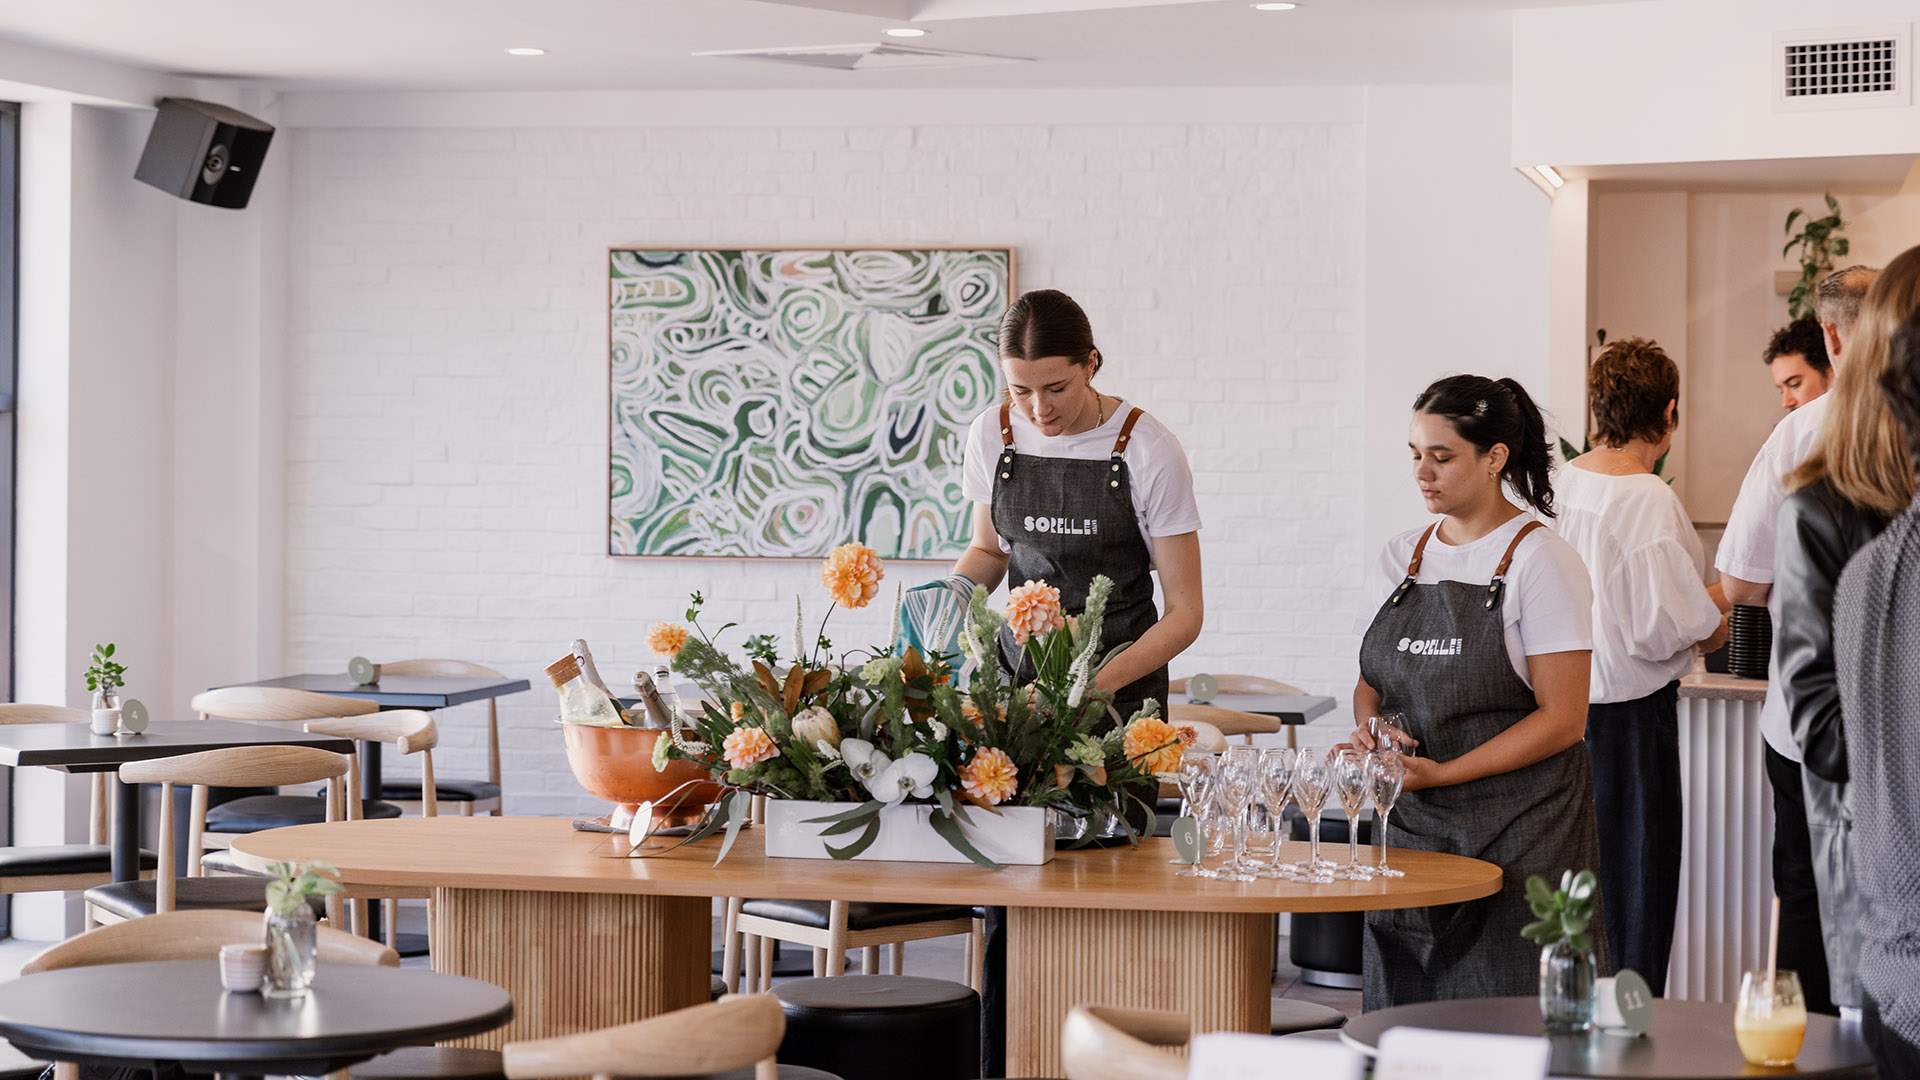 Sorelle Eatery Is St Lucia's New Italian-Inspired Cafe and Homewares Shop From the Tognini's Team